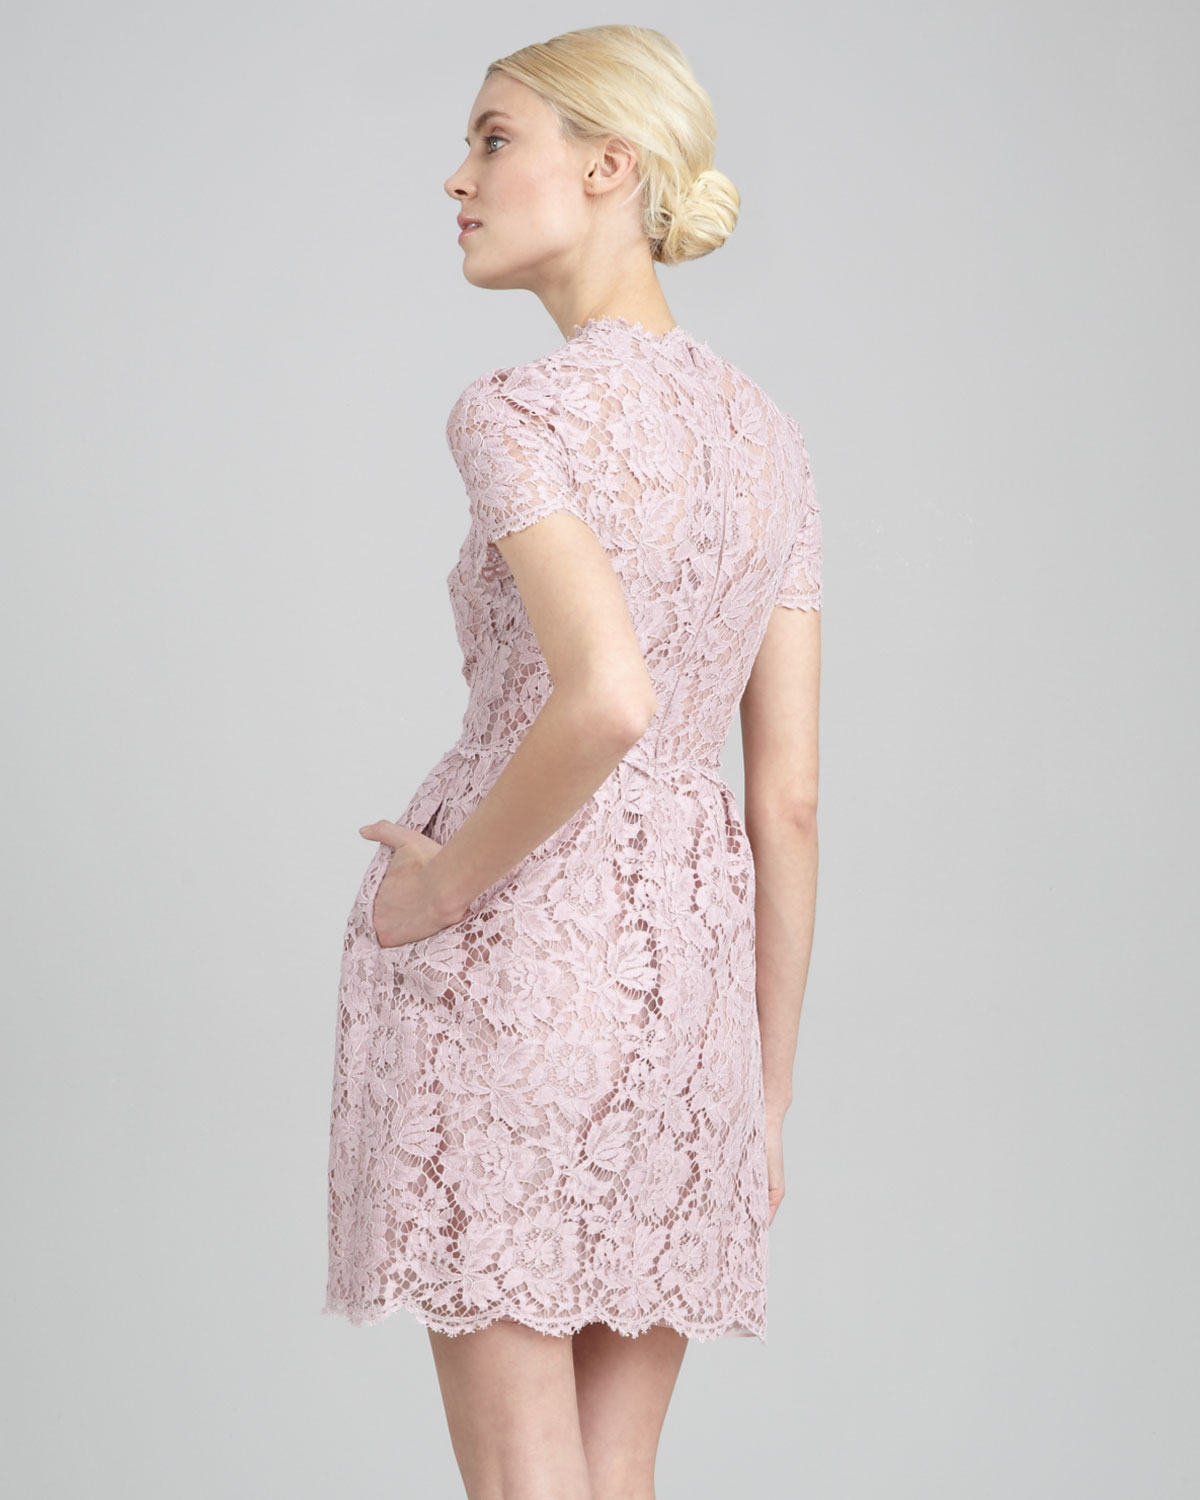 Lyst - Valentino Short-sleeve Floral Lace Dress Rosa in Pink